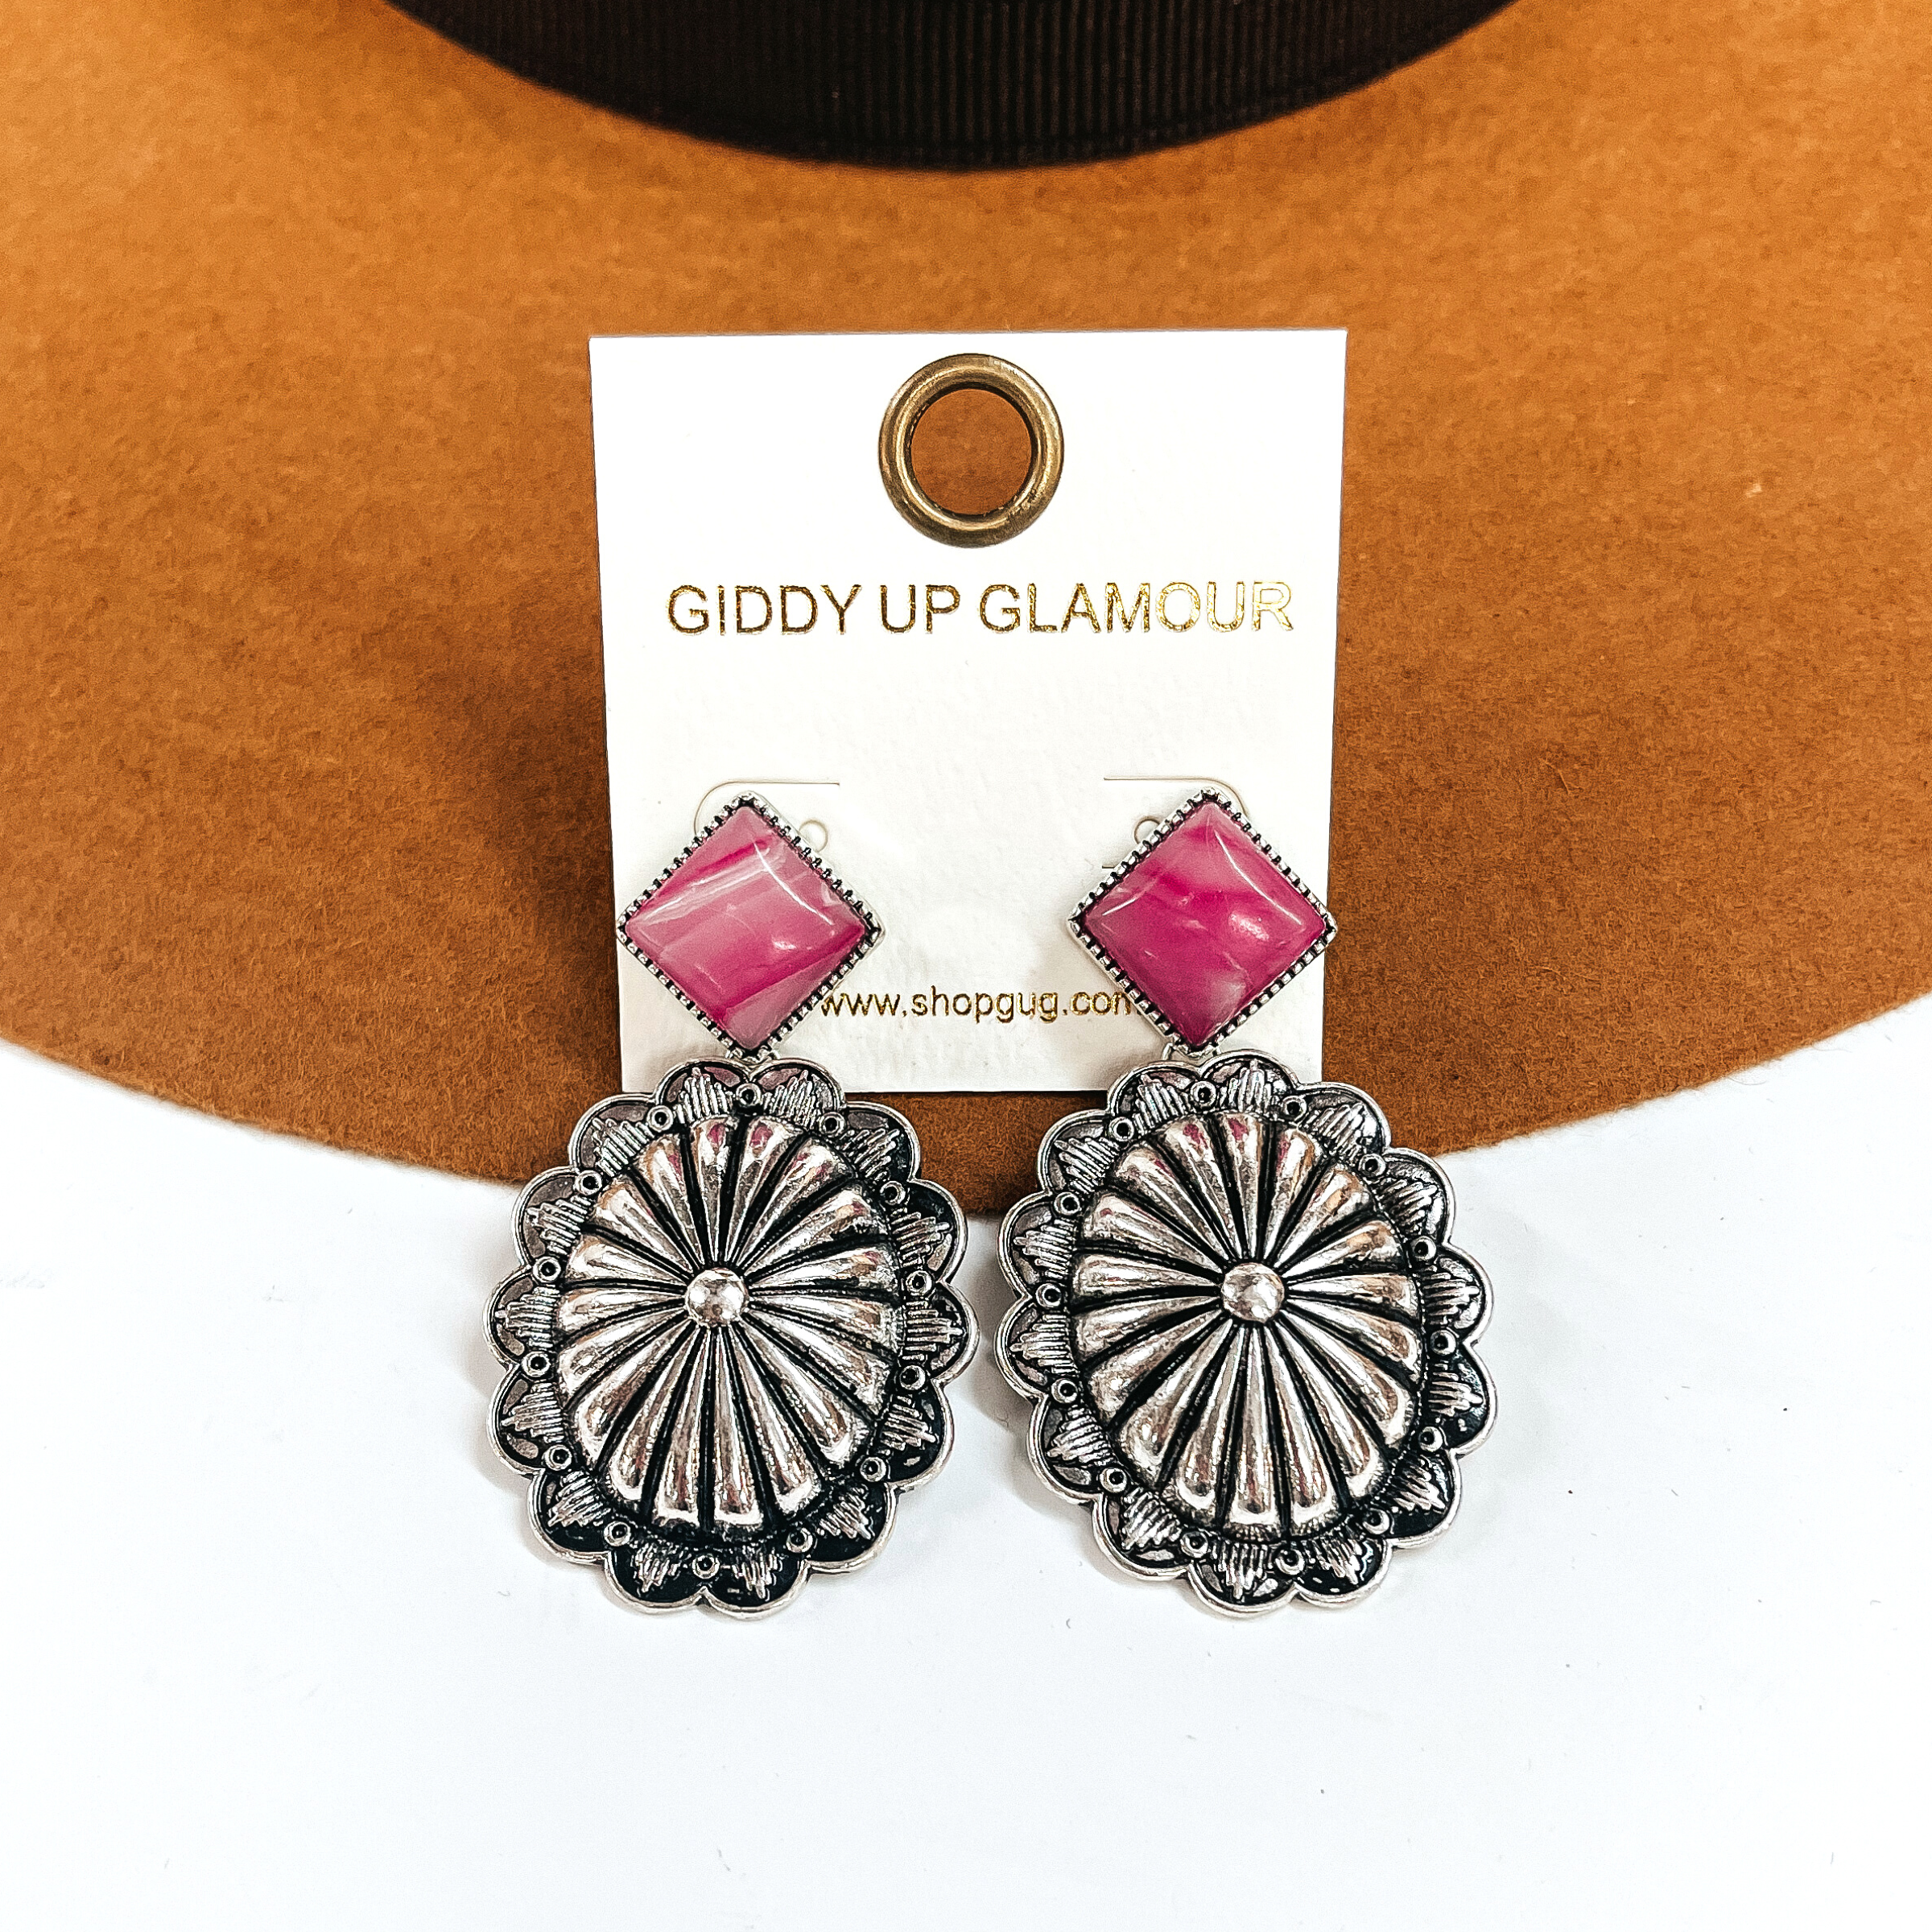 These are silver concho drop earrings with a pink-marble stone post in a silver  setting. These earrings are taken laying on a camel felt hat and on a white background.